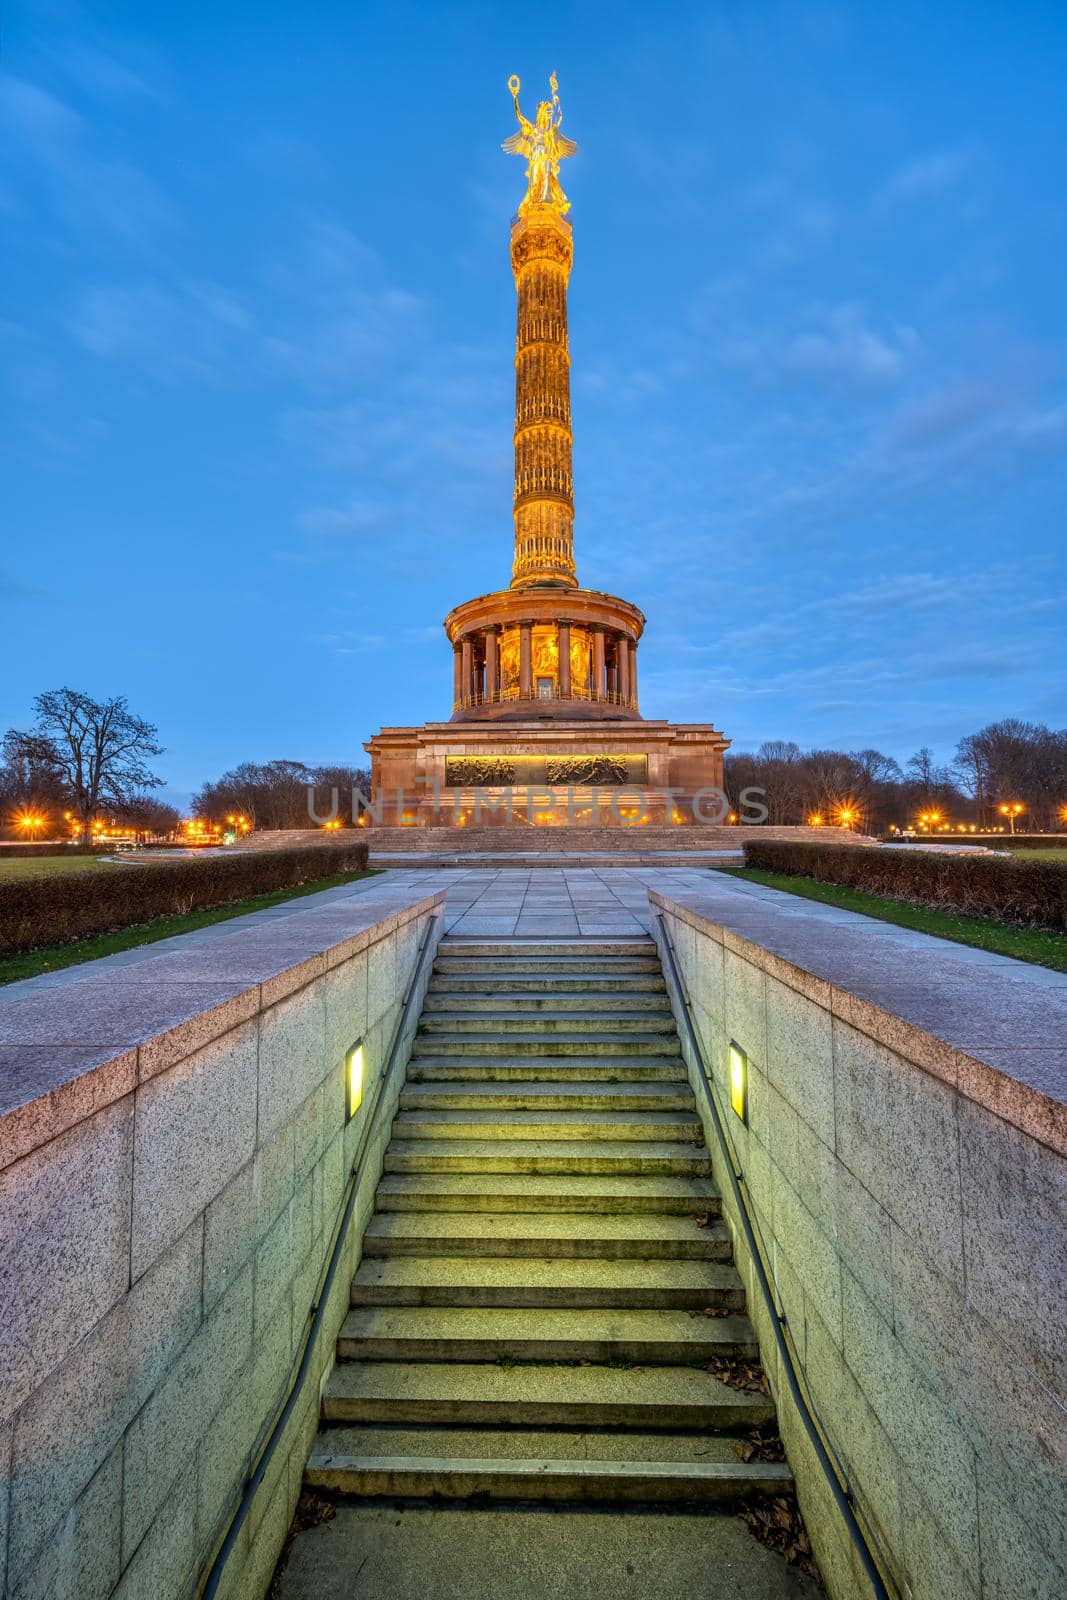 The famous Victory Column in the Tiergarten in Berlin, Germany, during the blue hour